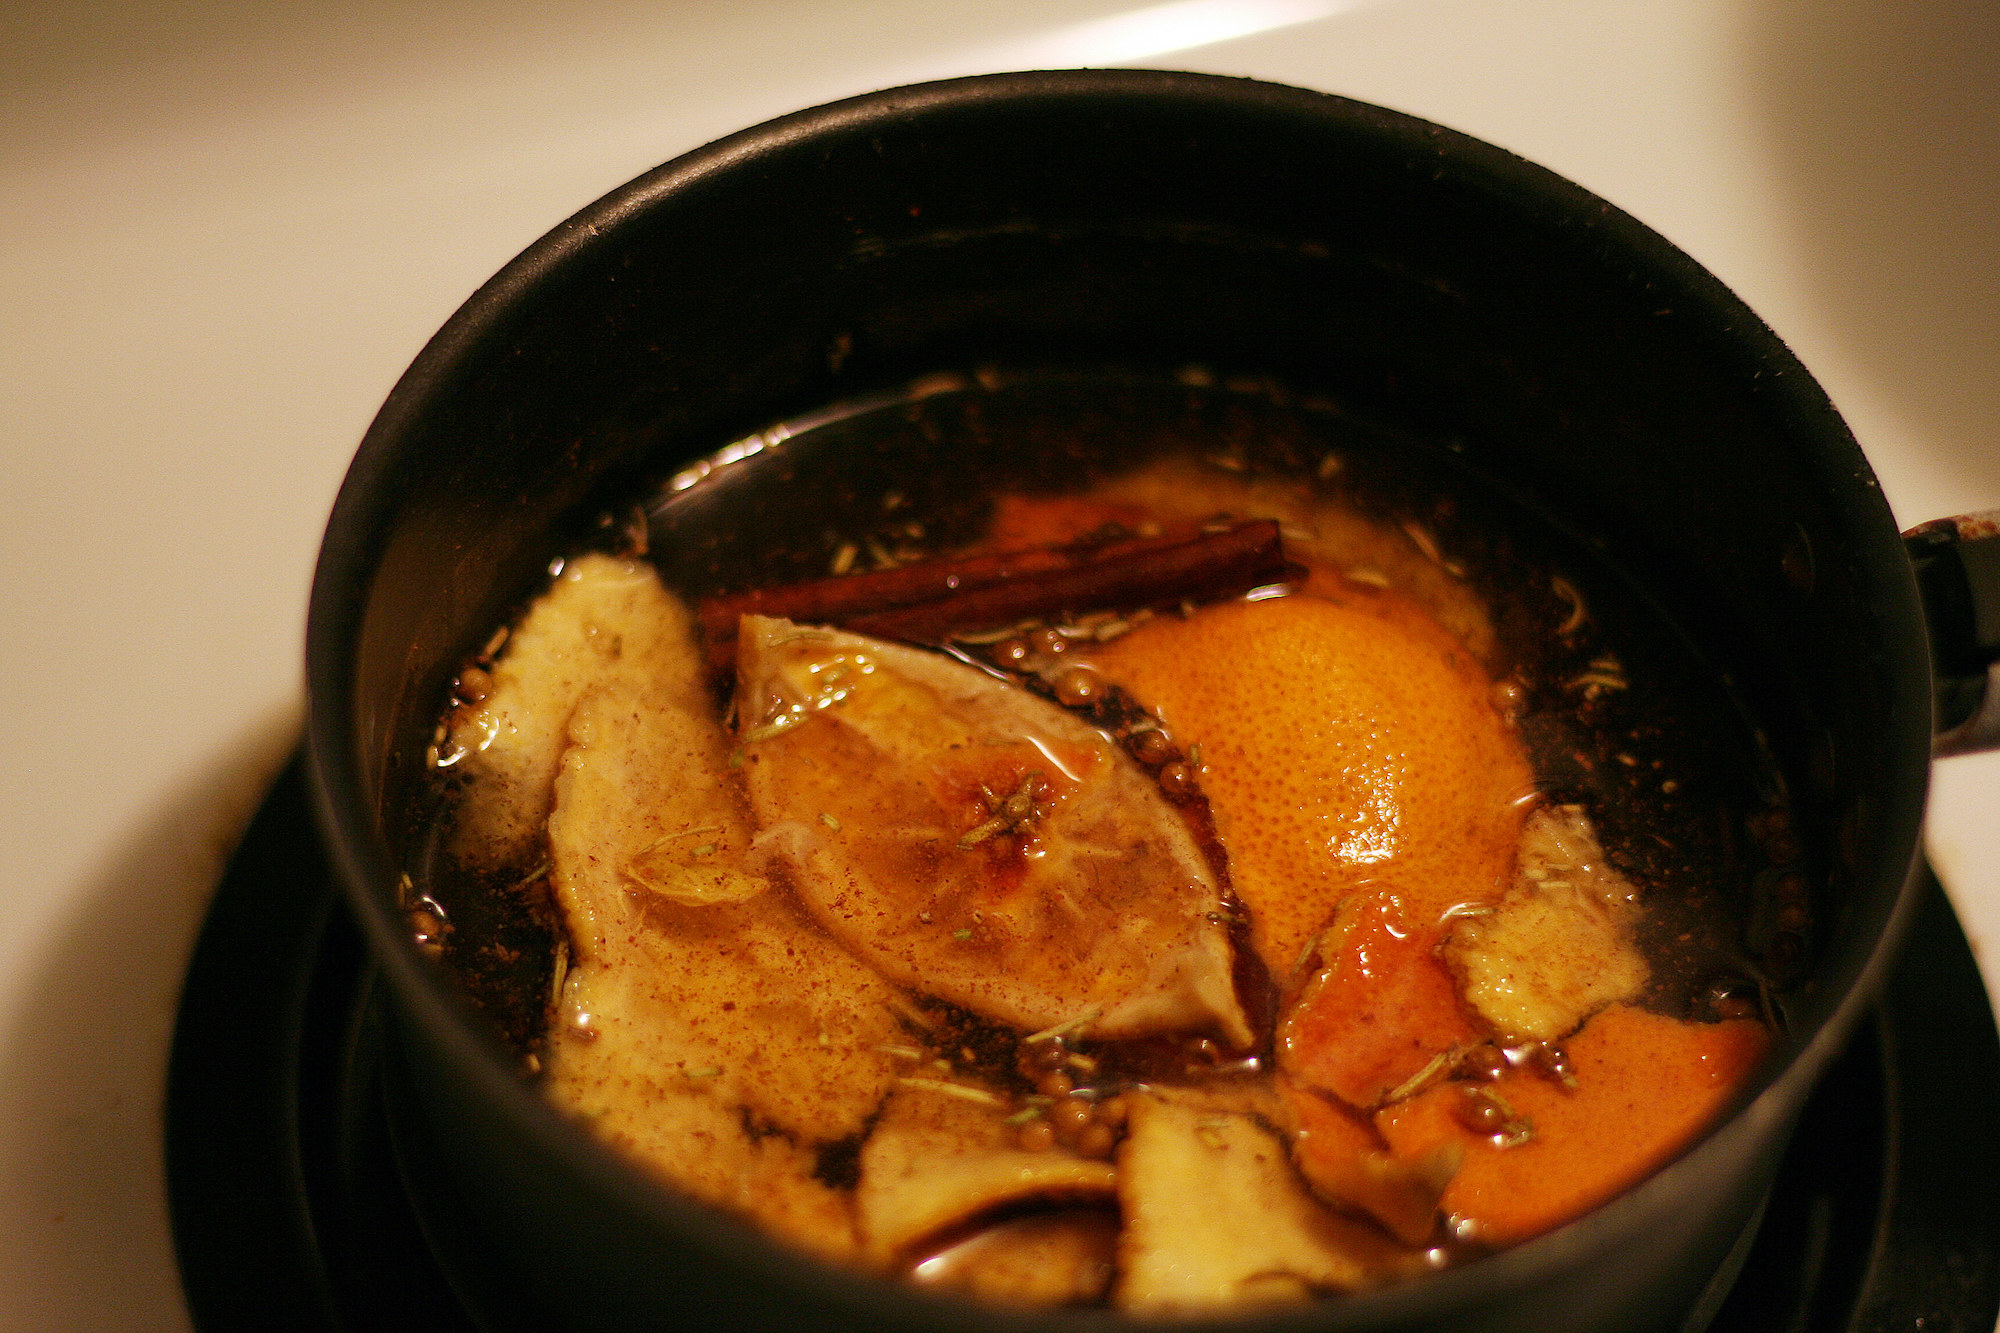 Fruit slices and cinnamon simmering in a pot on the stove